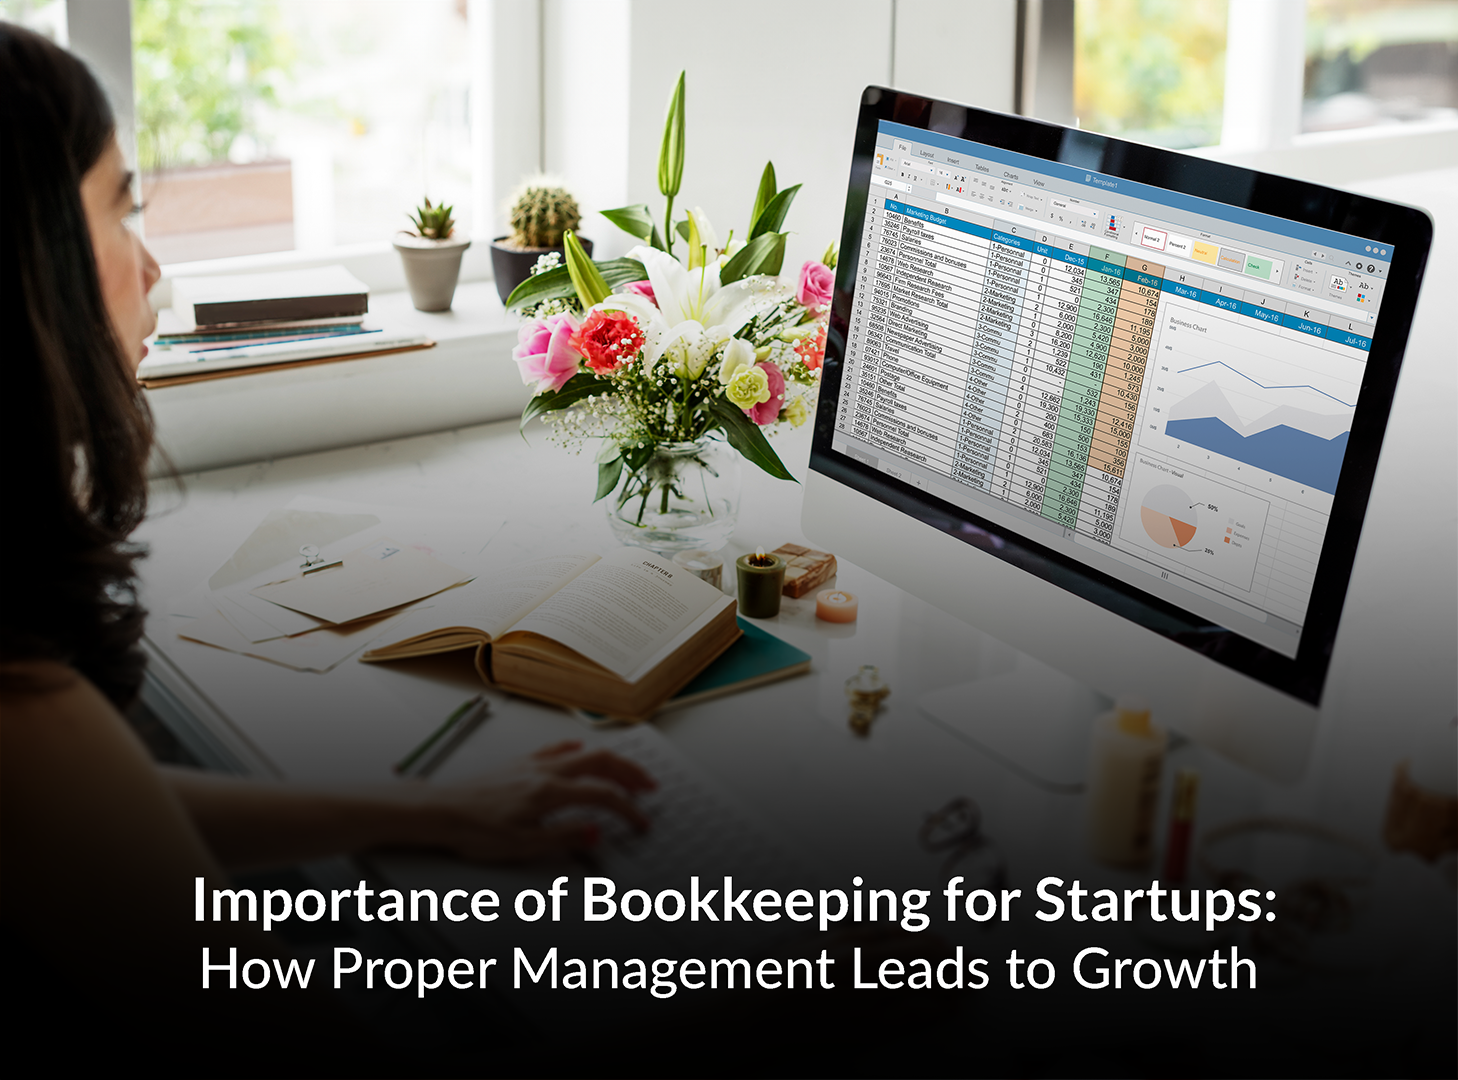 Importance of Bookkeeping for Startups: How Proper Management Leads to Growth